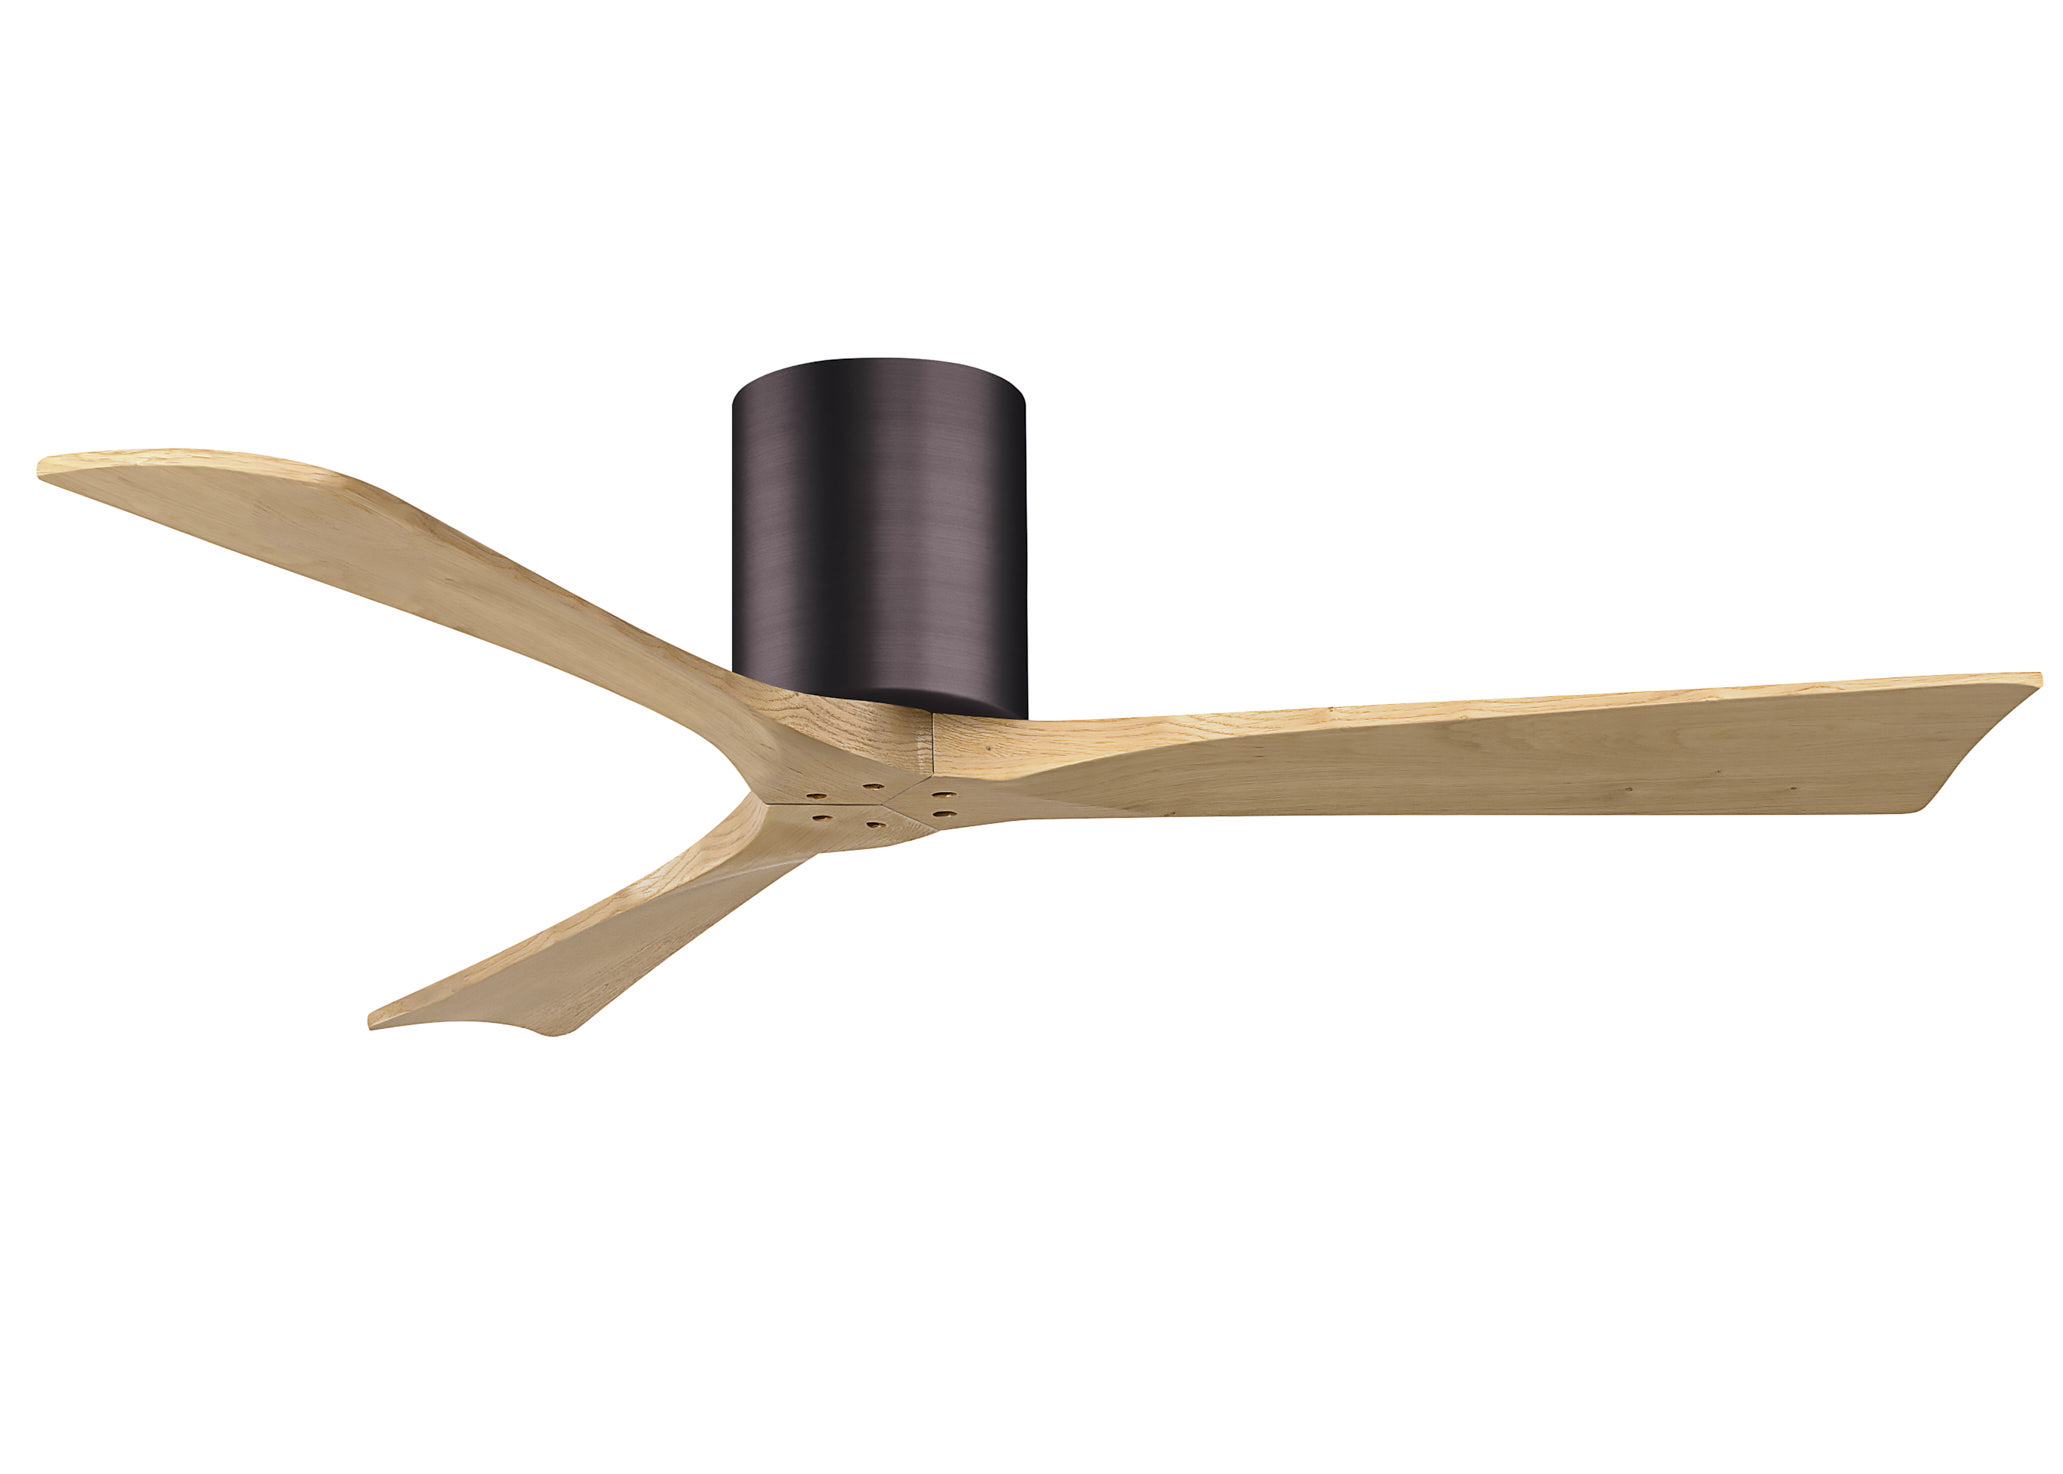 Irene-3H 6-speed ceiling fan in brushed bronze finish with 52